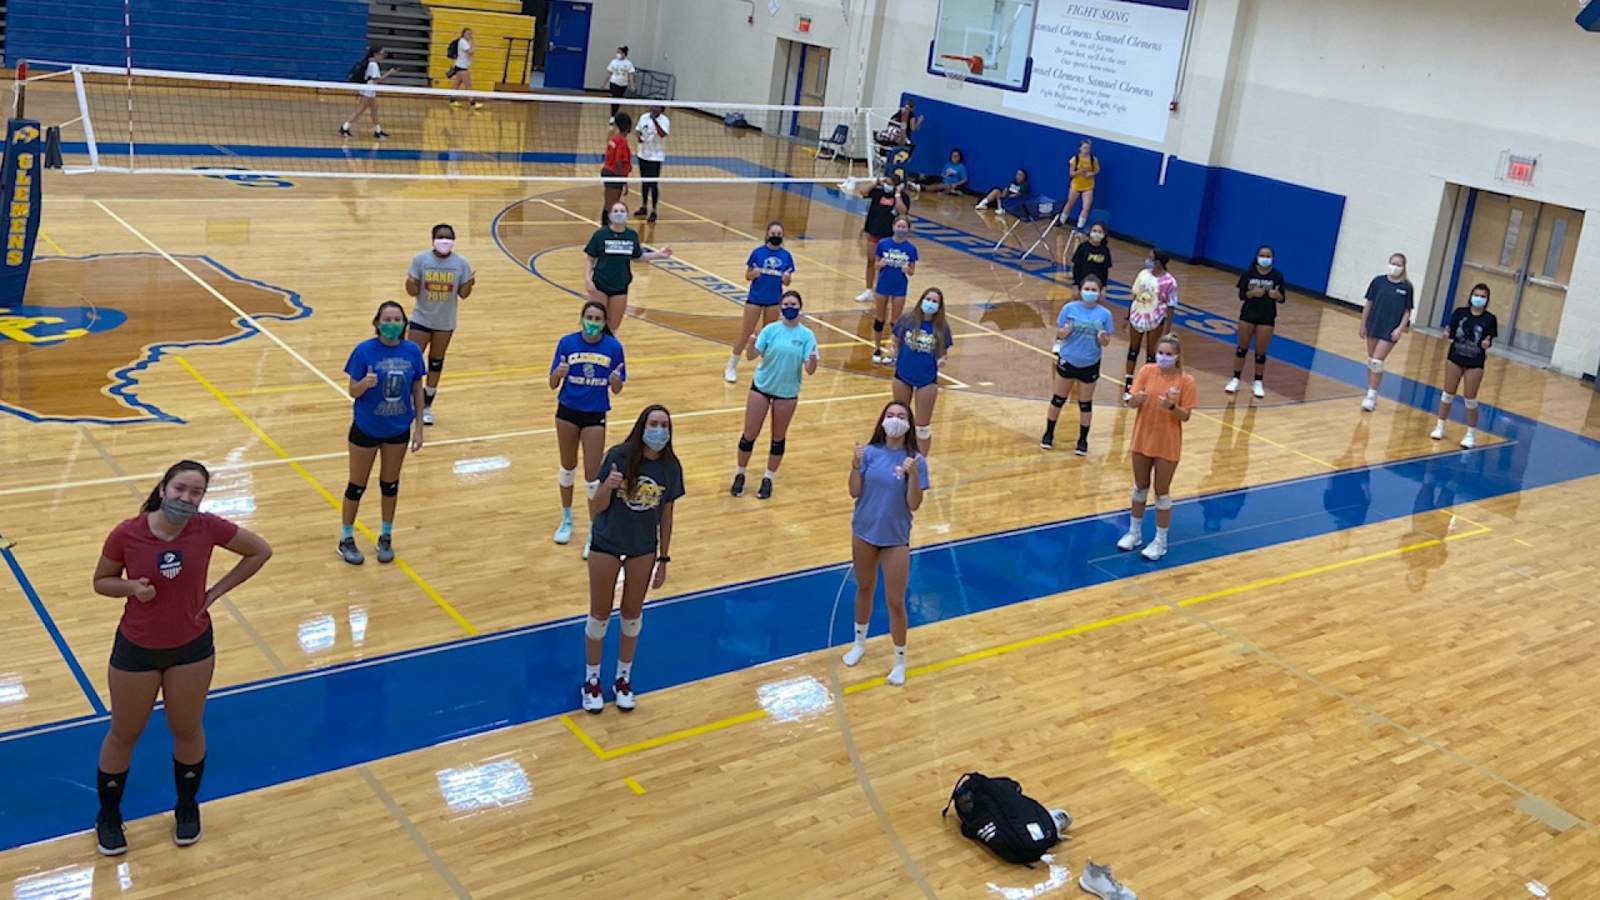 San Antonio area volleyball teams adapting to shorter schedules, strict guidelines